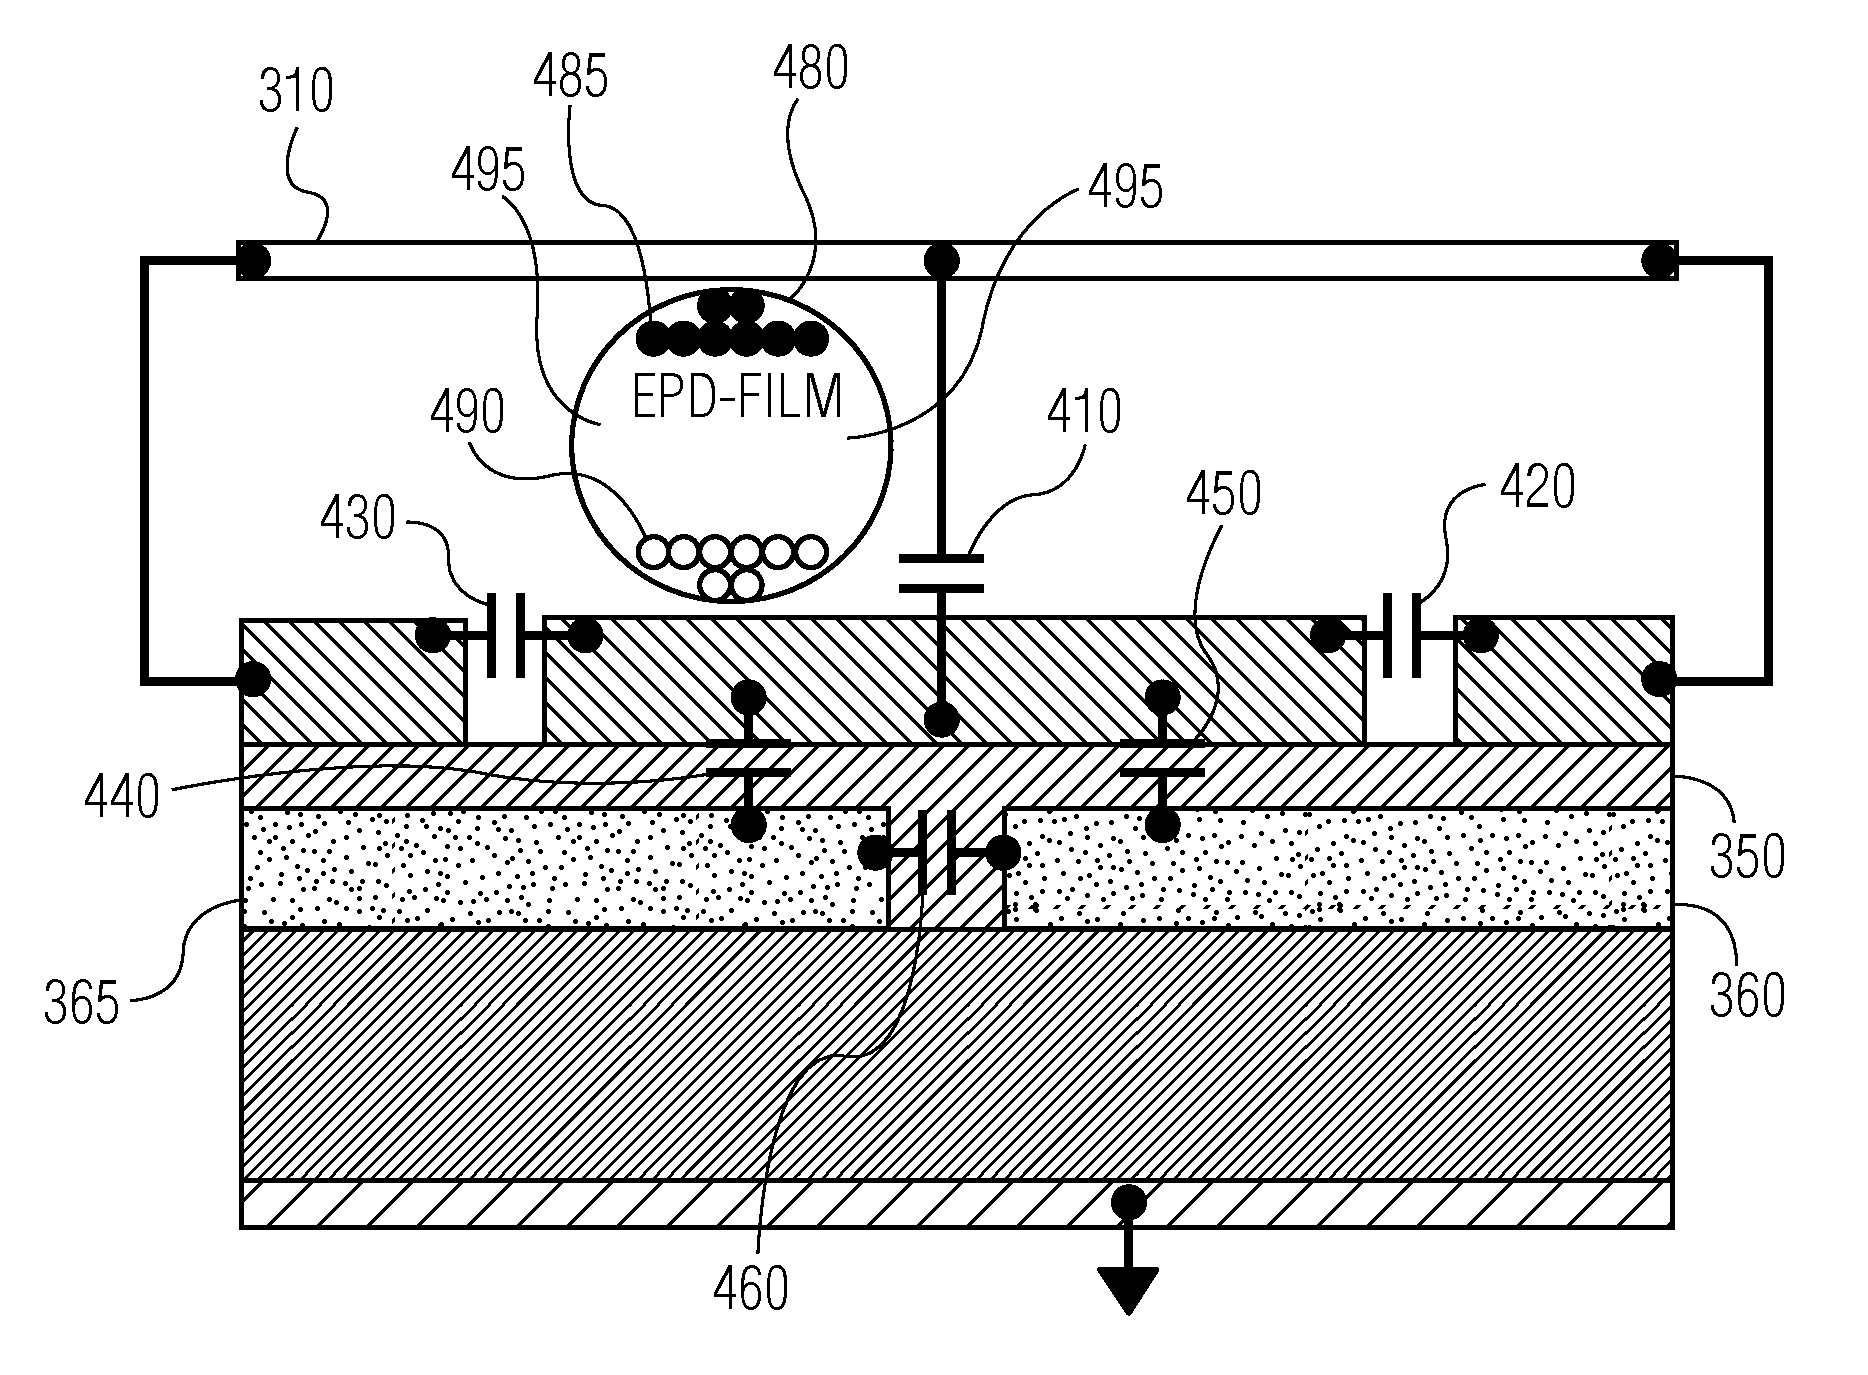 Passive multiplexing extension for electronic paper displays